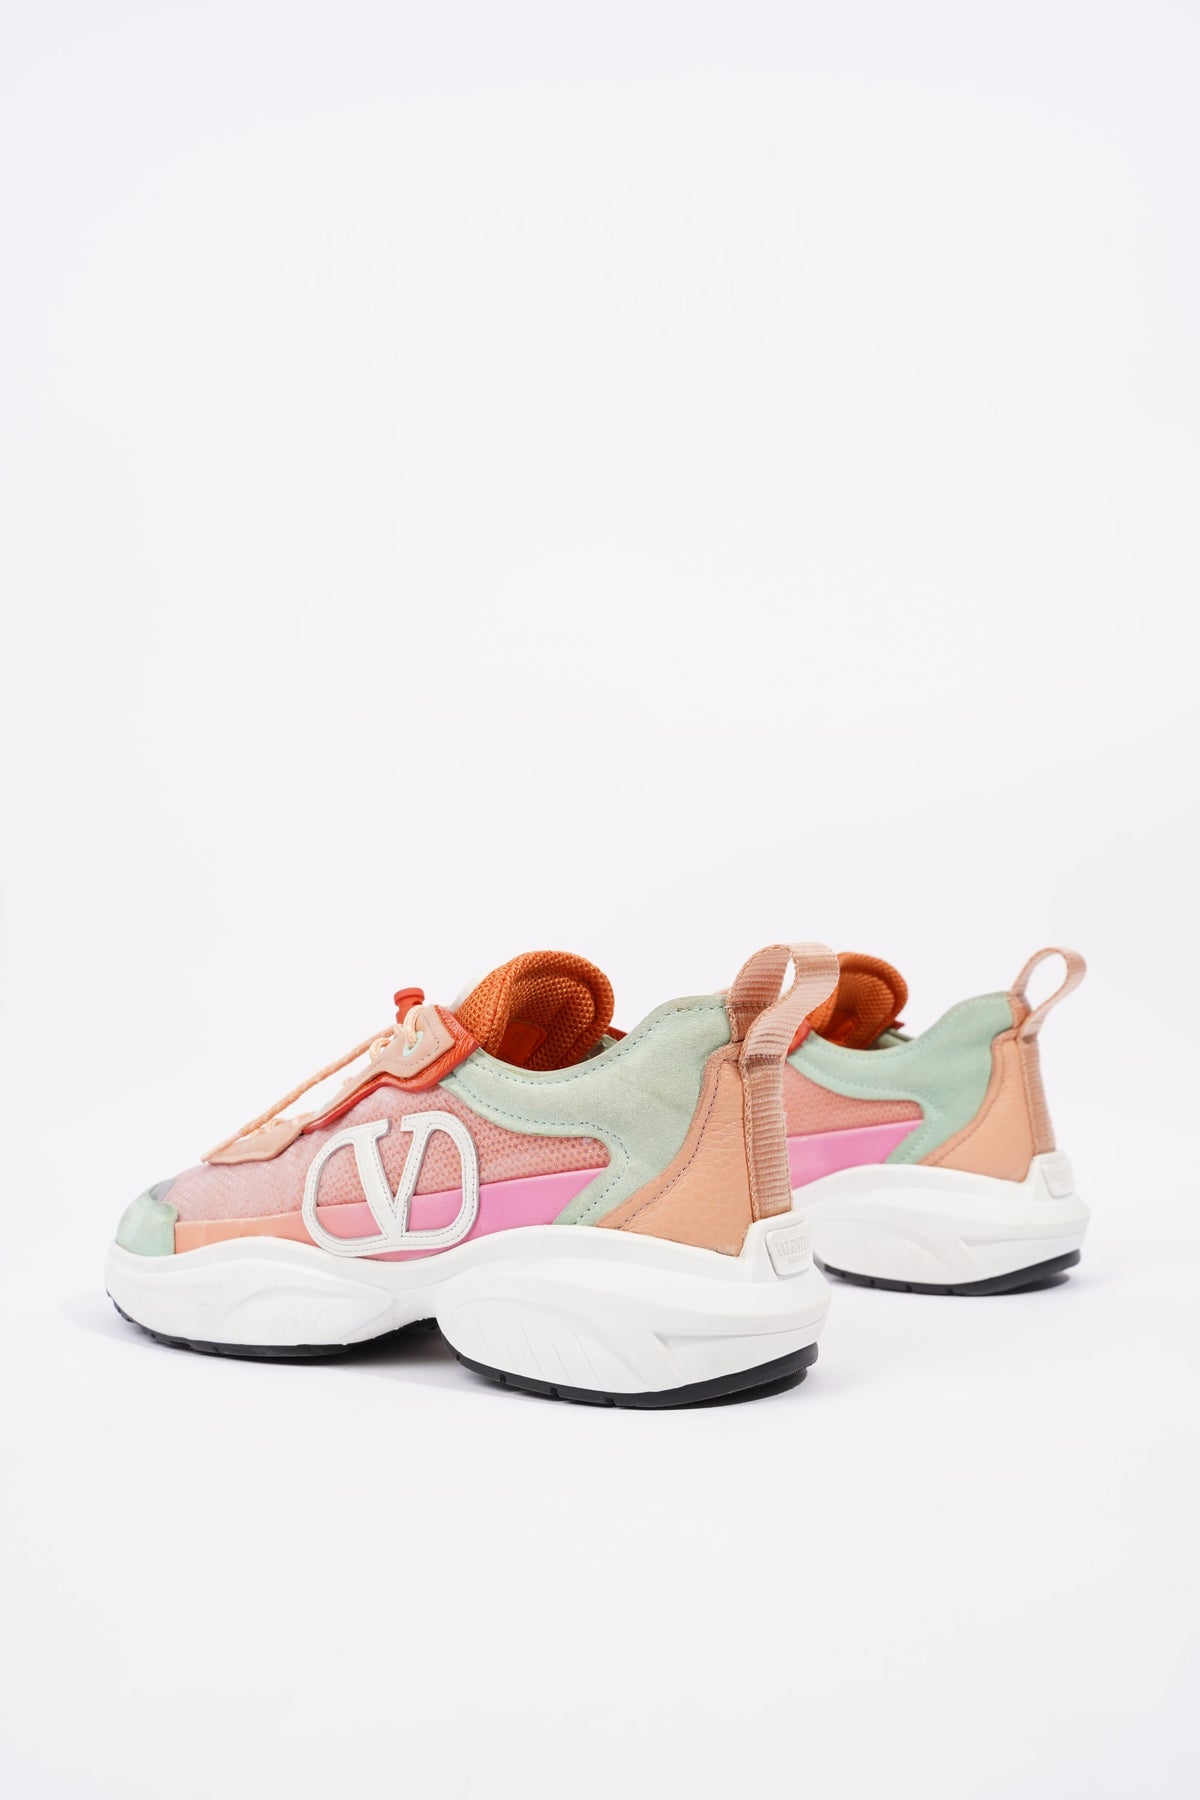 VALENTINO Shegoes VLOGO Leather And Fabric Sneakers in Peach Mint 35.5 |  eBay